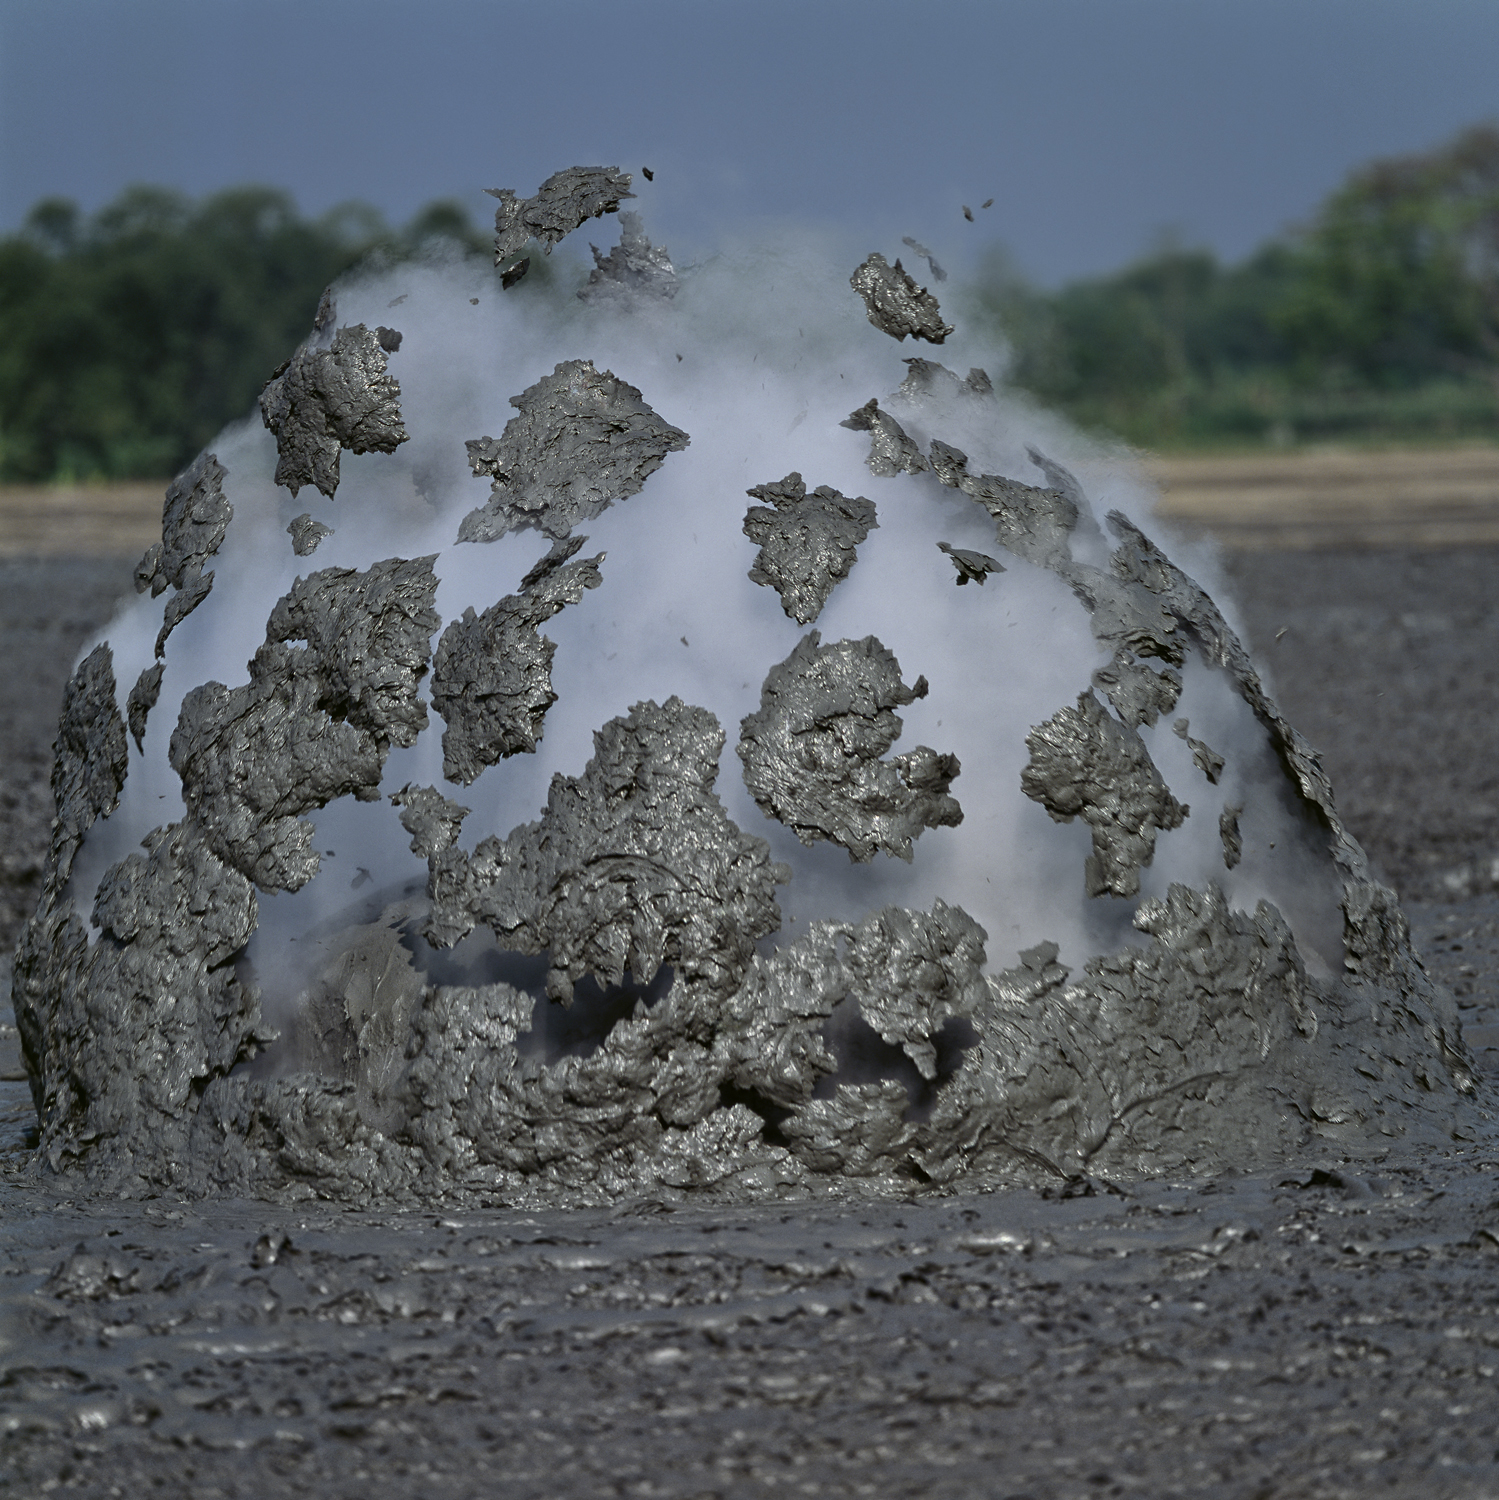 Blobs of mud in mid air from a bursting bubble, Bledug Kuwu, Indonesia 